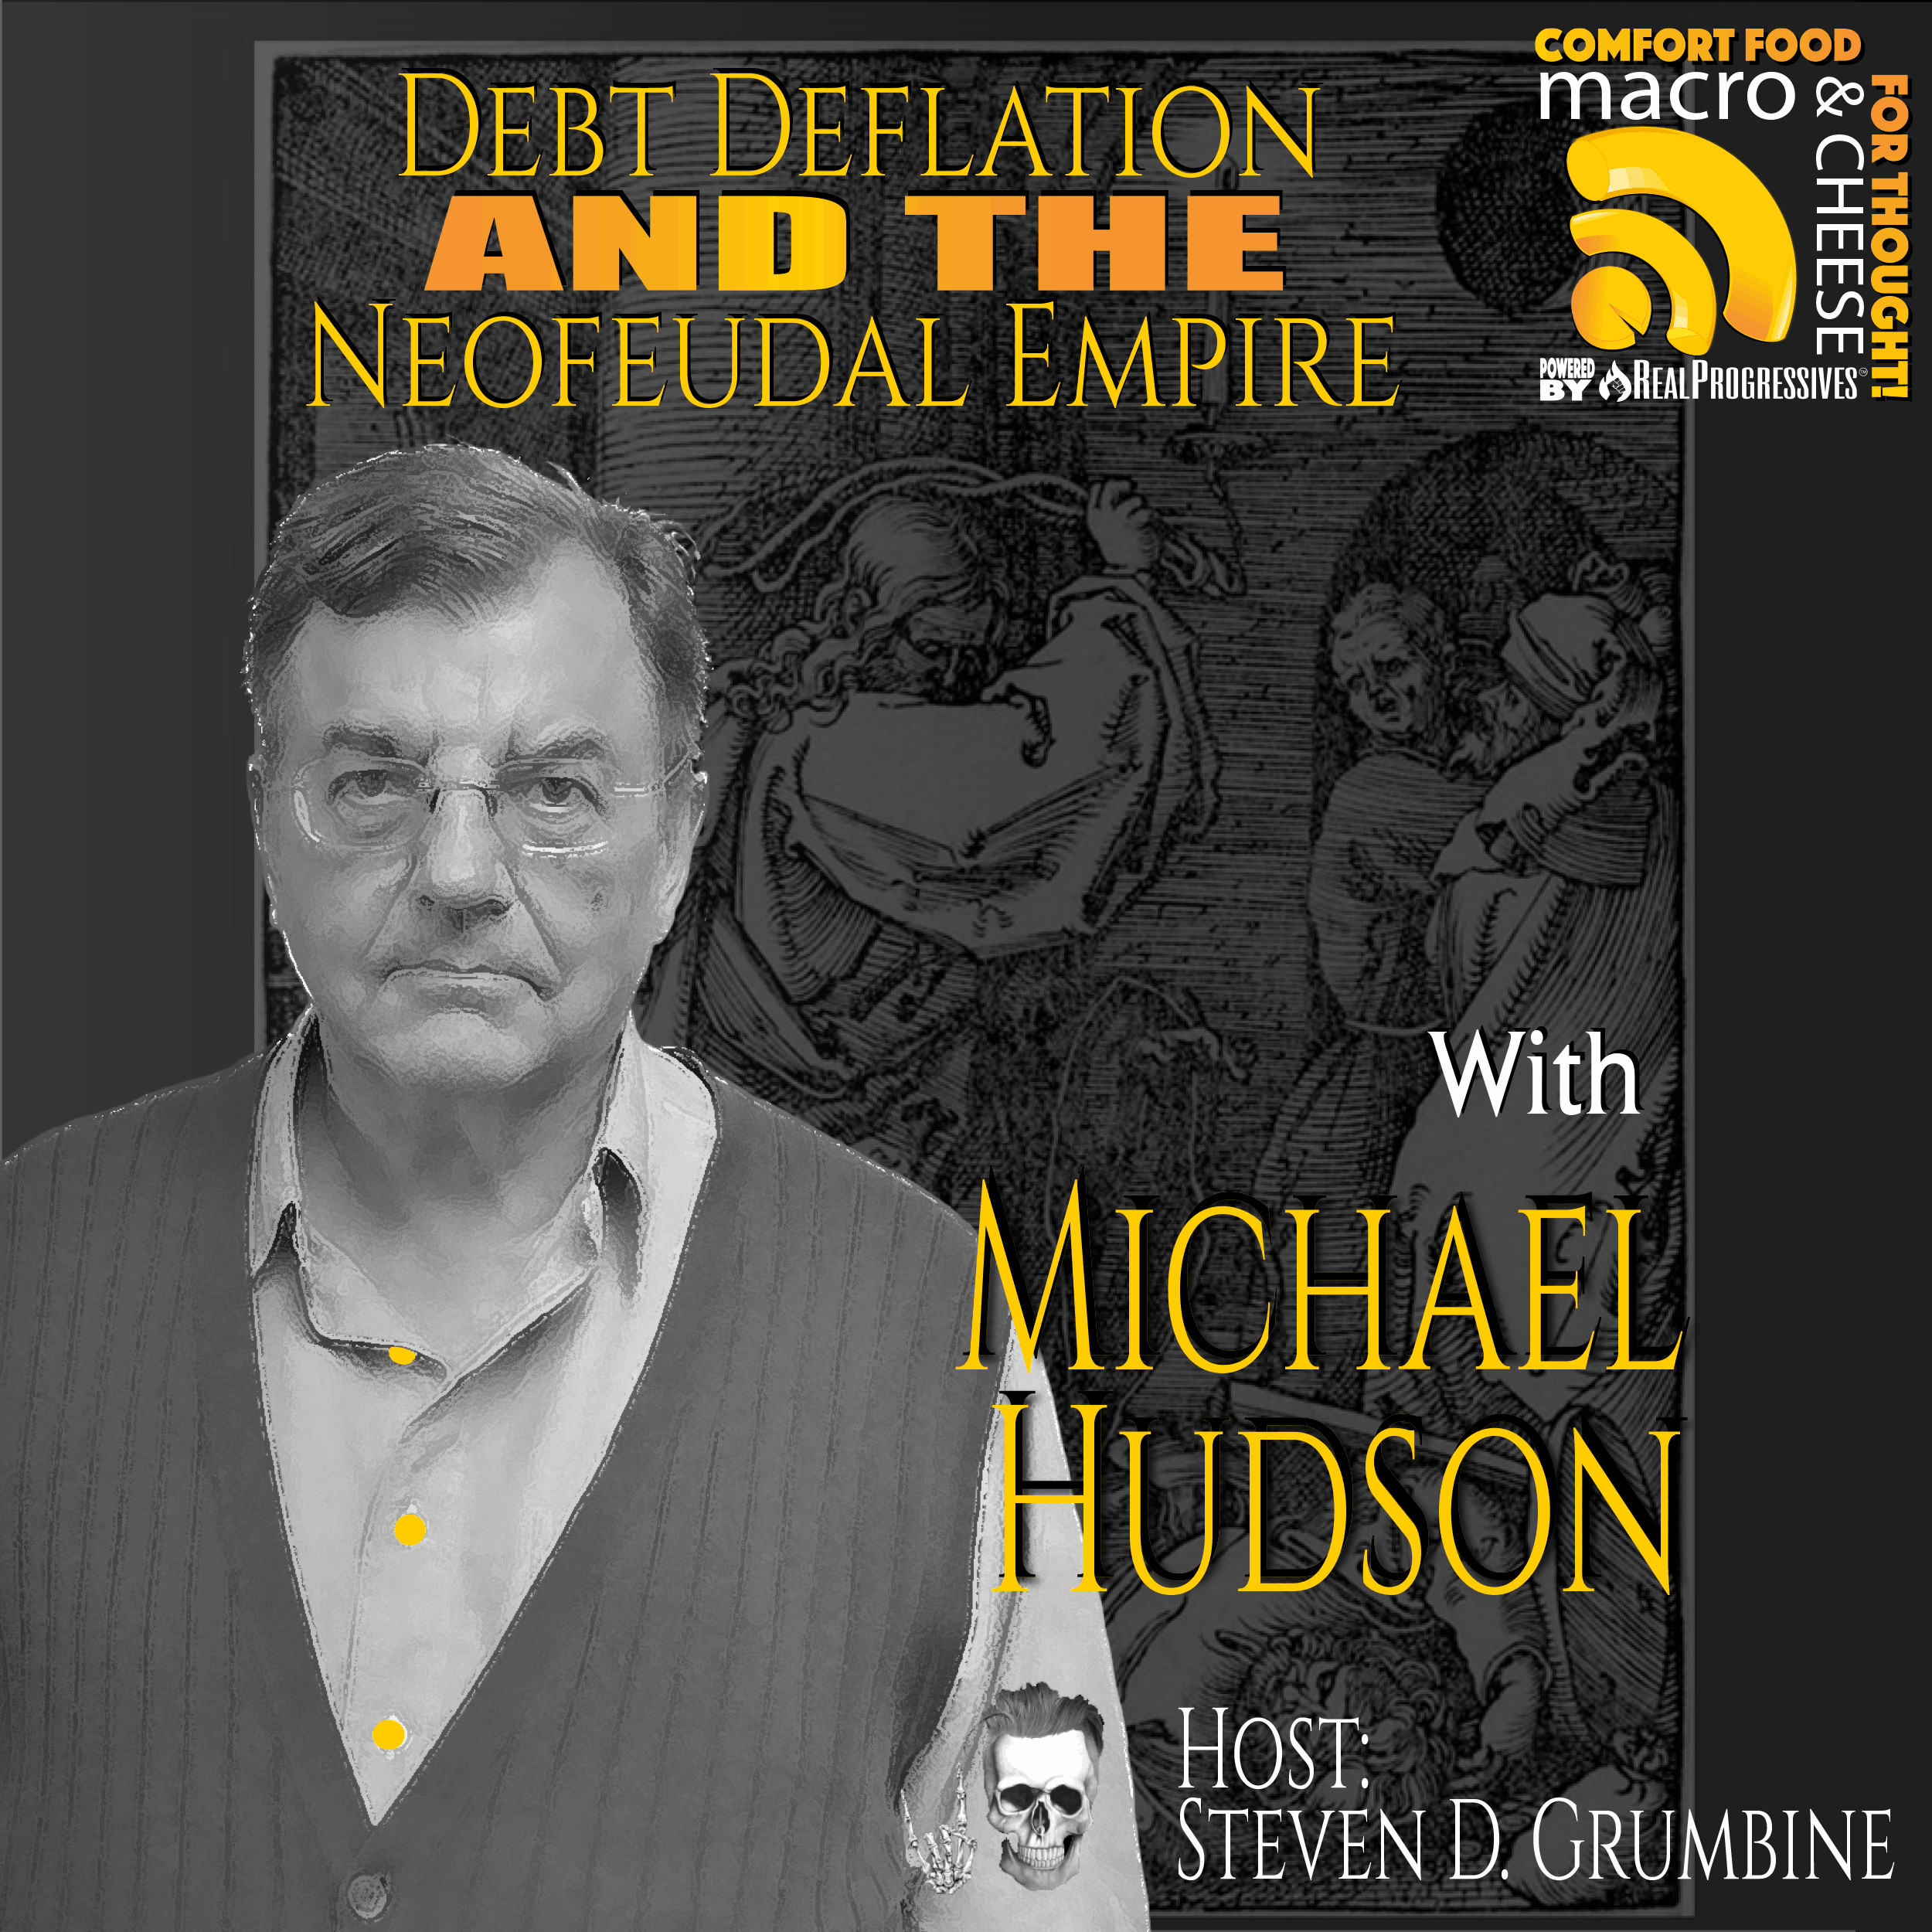 Episode 88 - Debt Deflation and the Neofeudal Empire with Michael Hudson